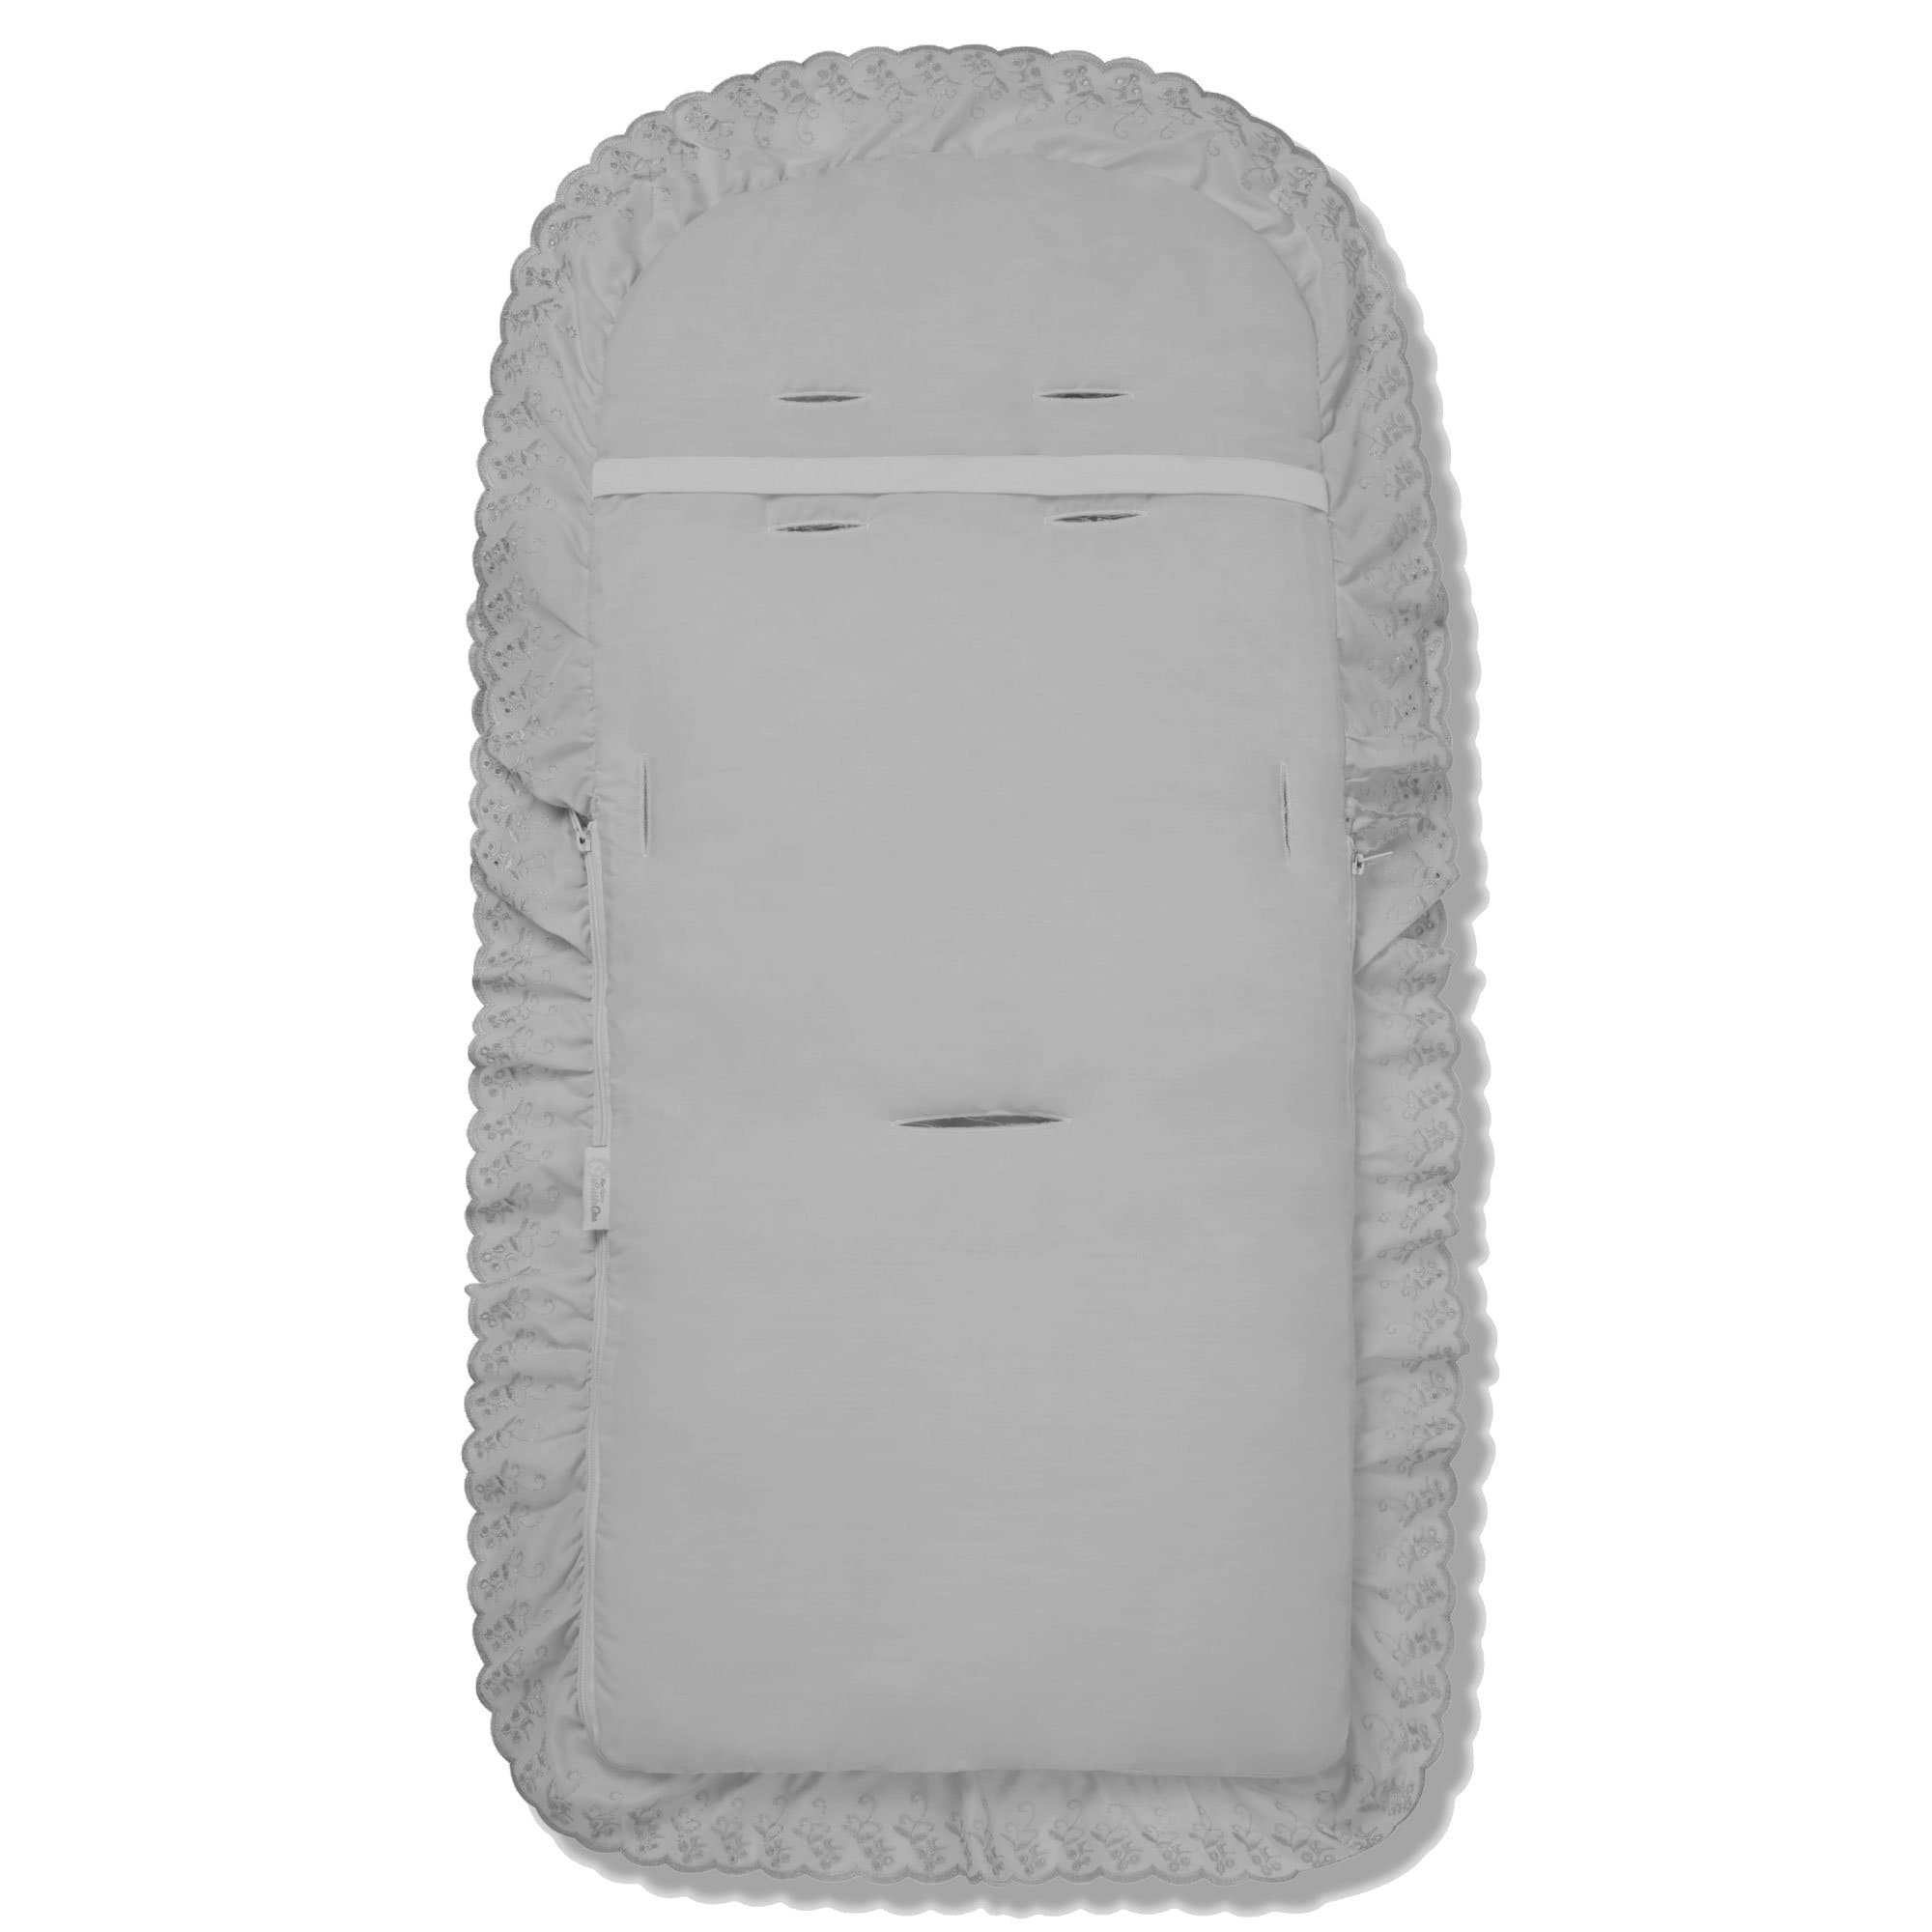 Broderie Anglaise Footmuff / Cosy Toes Compatible with BabiesRus - For Your Little One